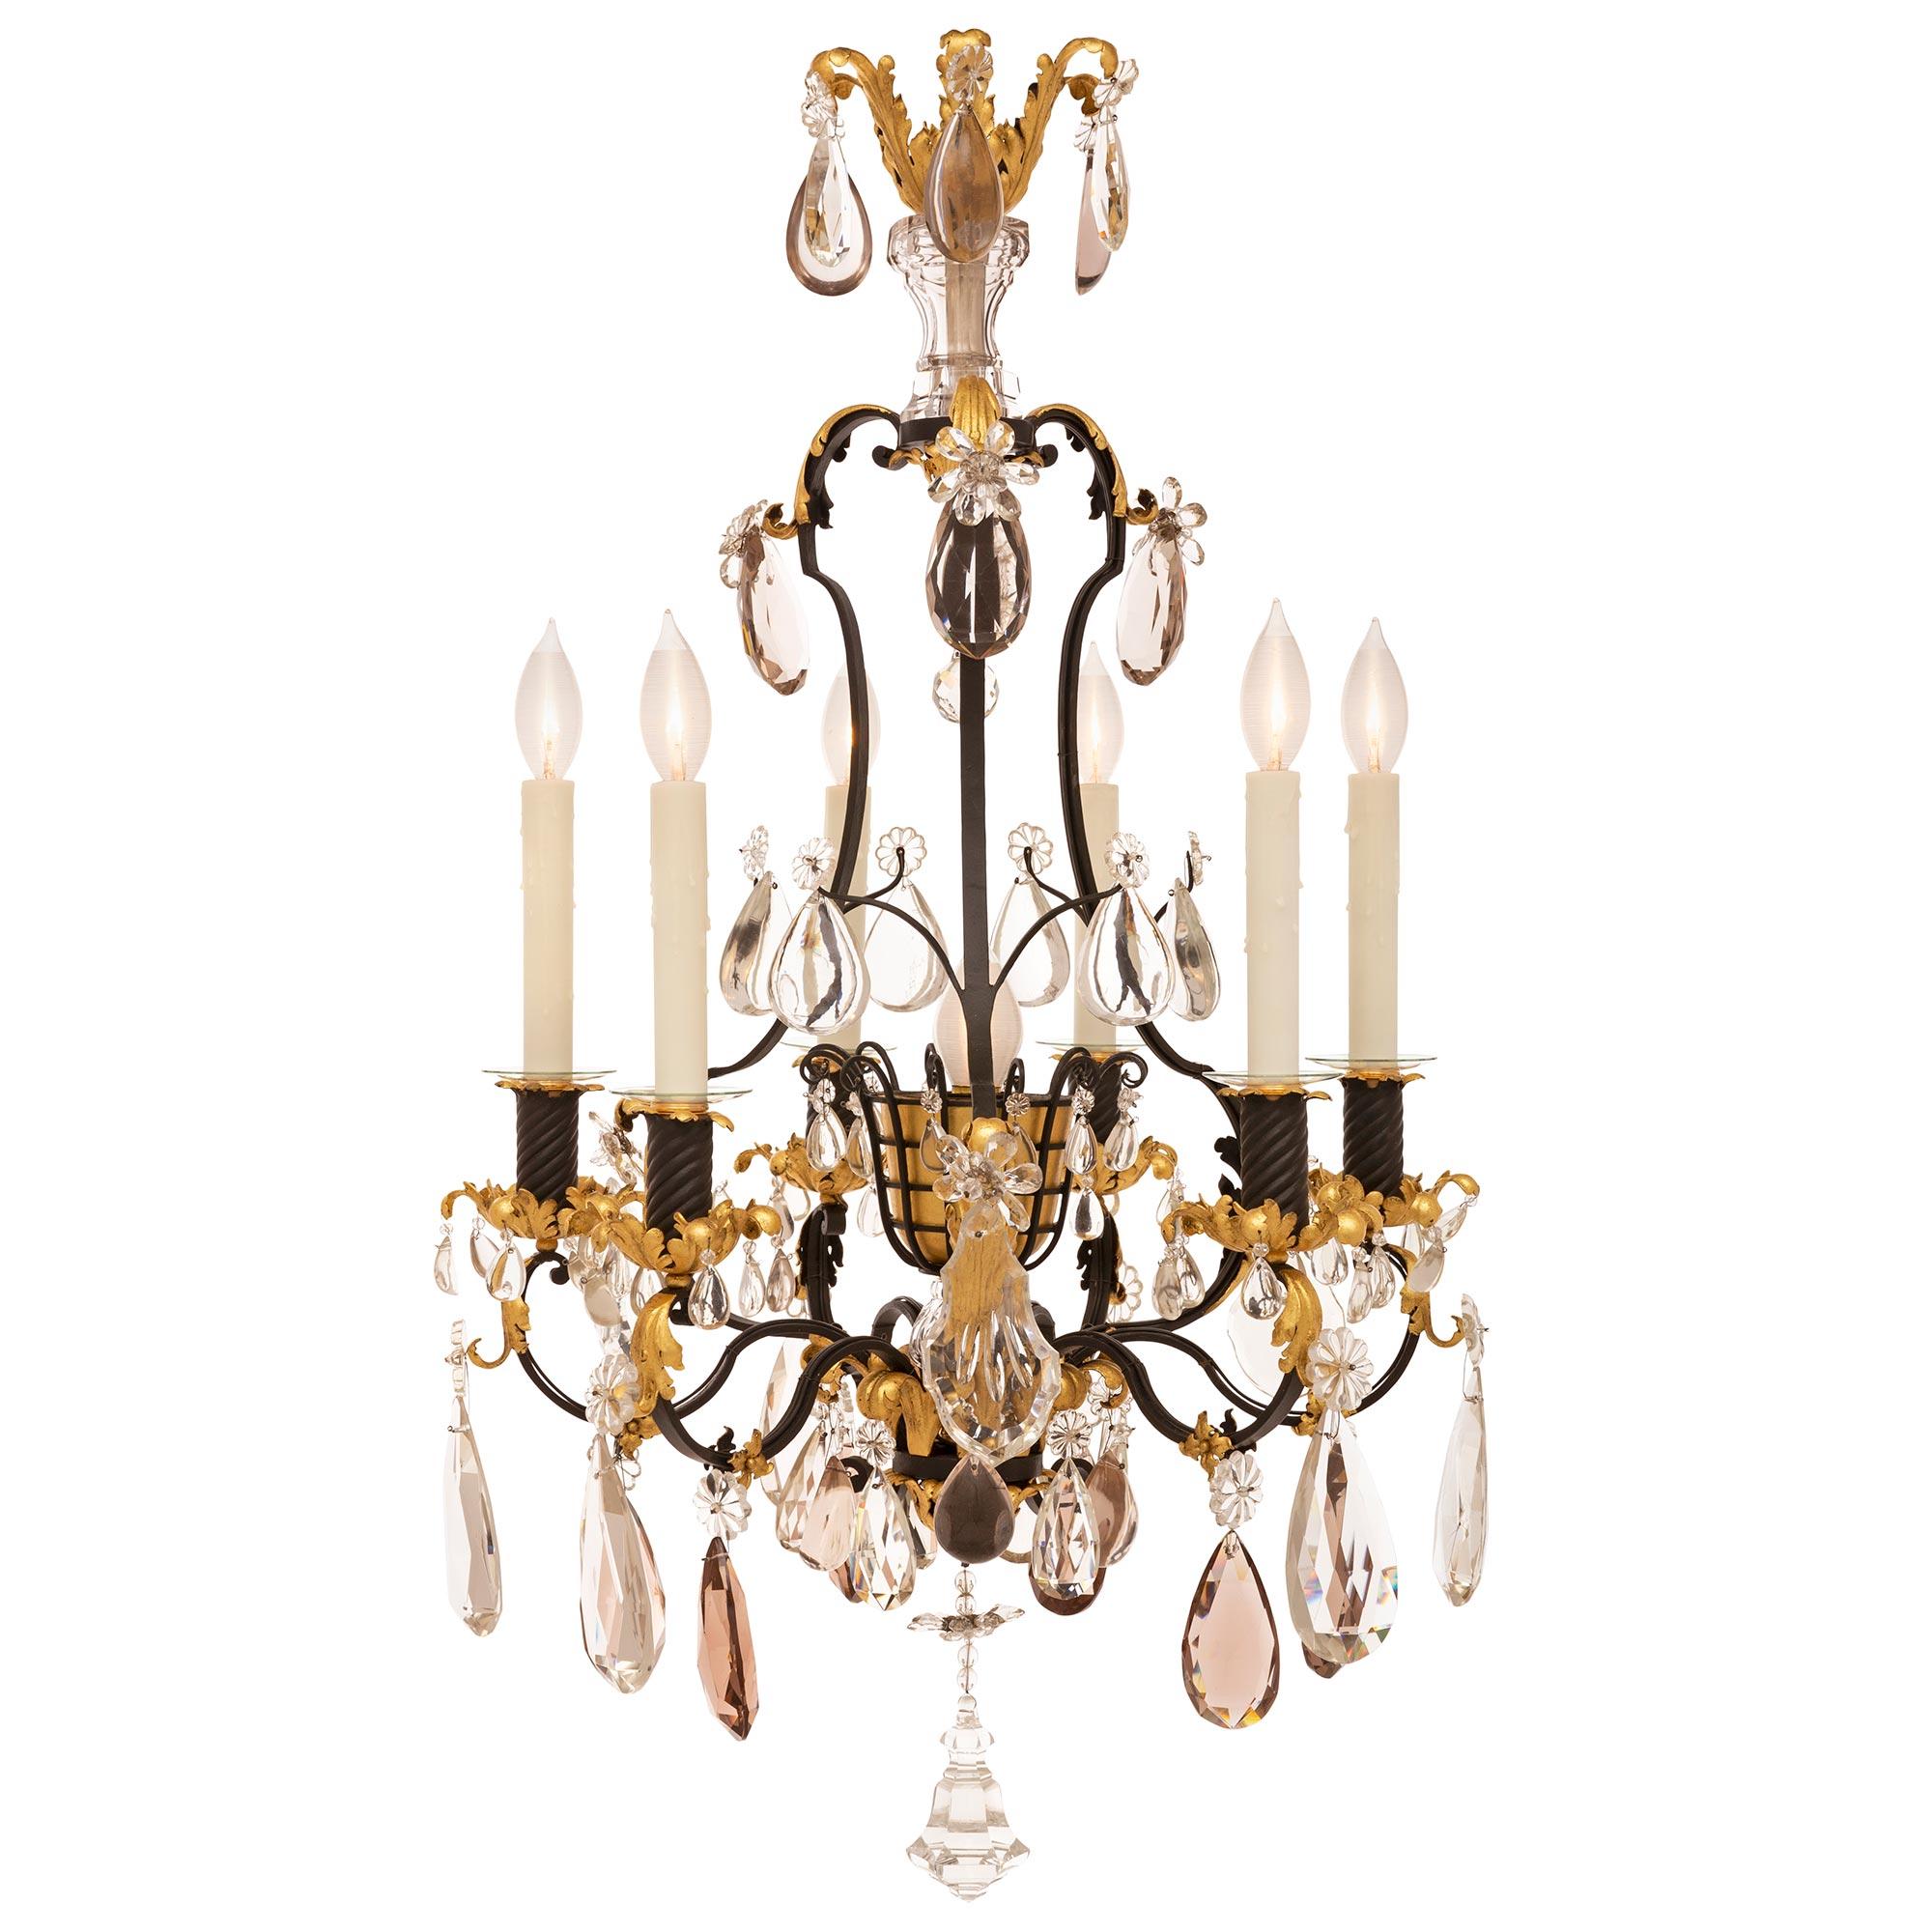 An exceptional and very unique French 19th century Louis XVI st. wrought iron, gilt metal, and crystal chandelier likely by Maison Bagues. The six arm seven light chandelier is centered by a charming and most unique bottom crystal pendant below